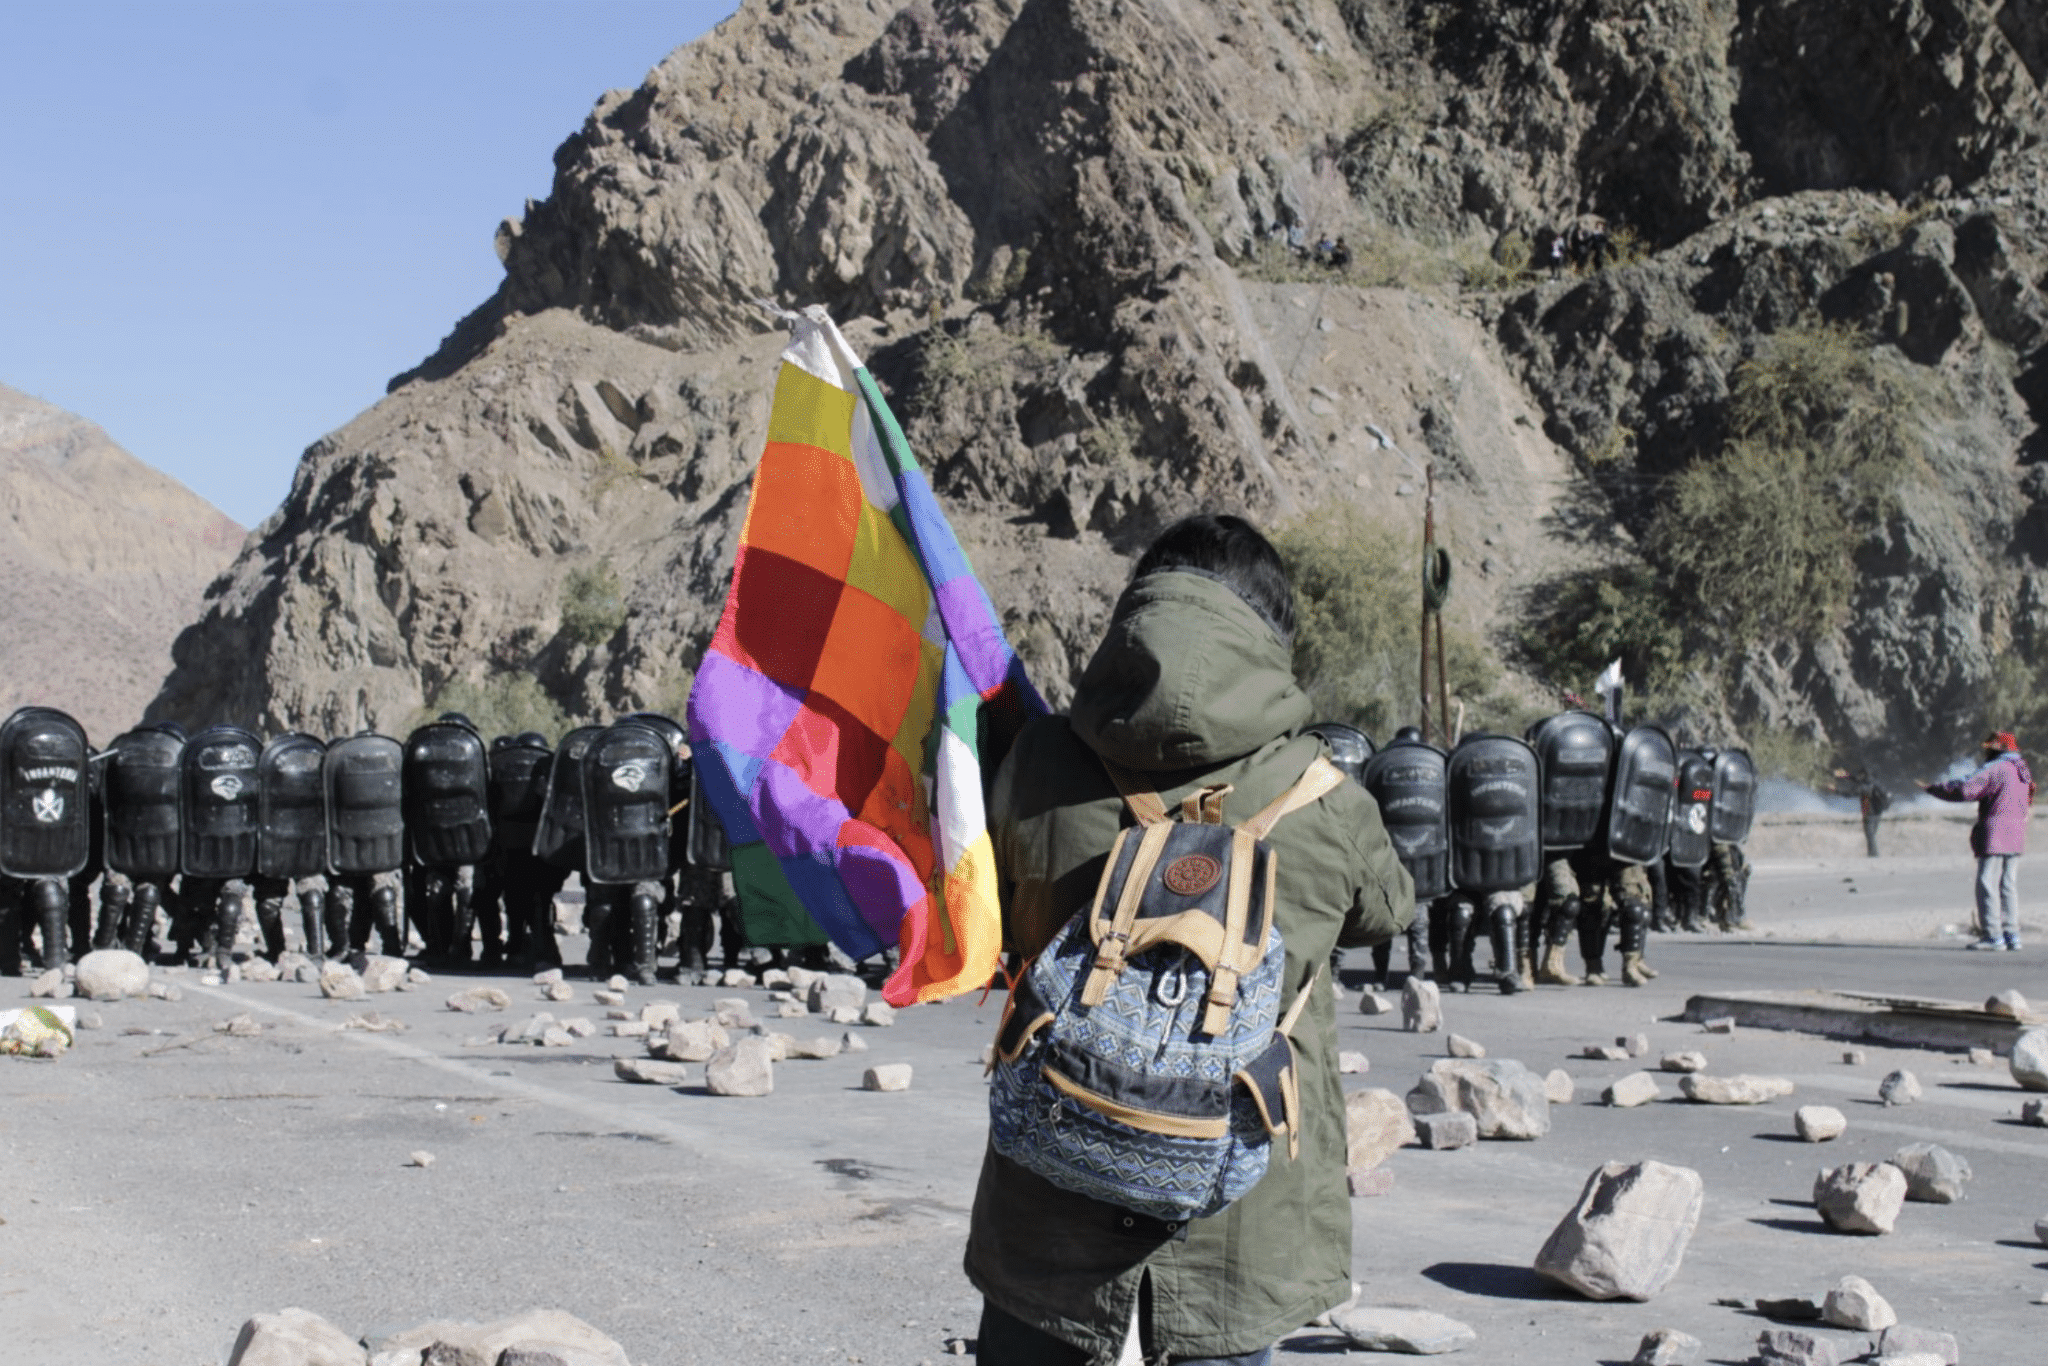 Protester holding a Wiphala flag faces a large group of riot police in Jujuy, Argentina. Photo: Susi Maresca.